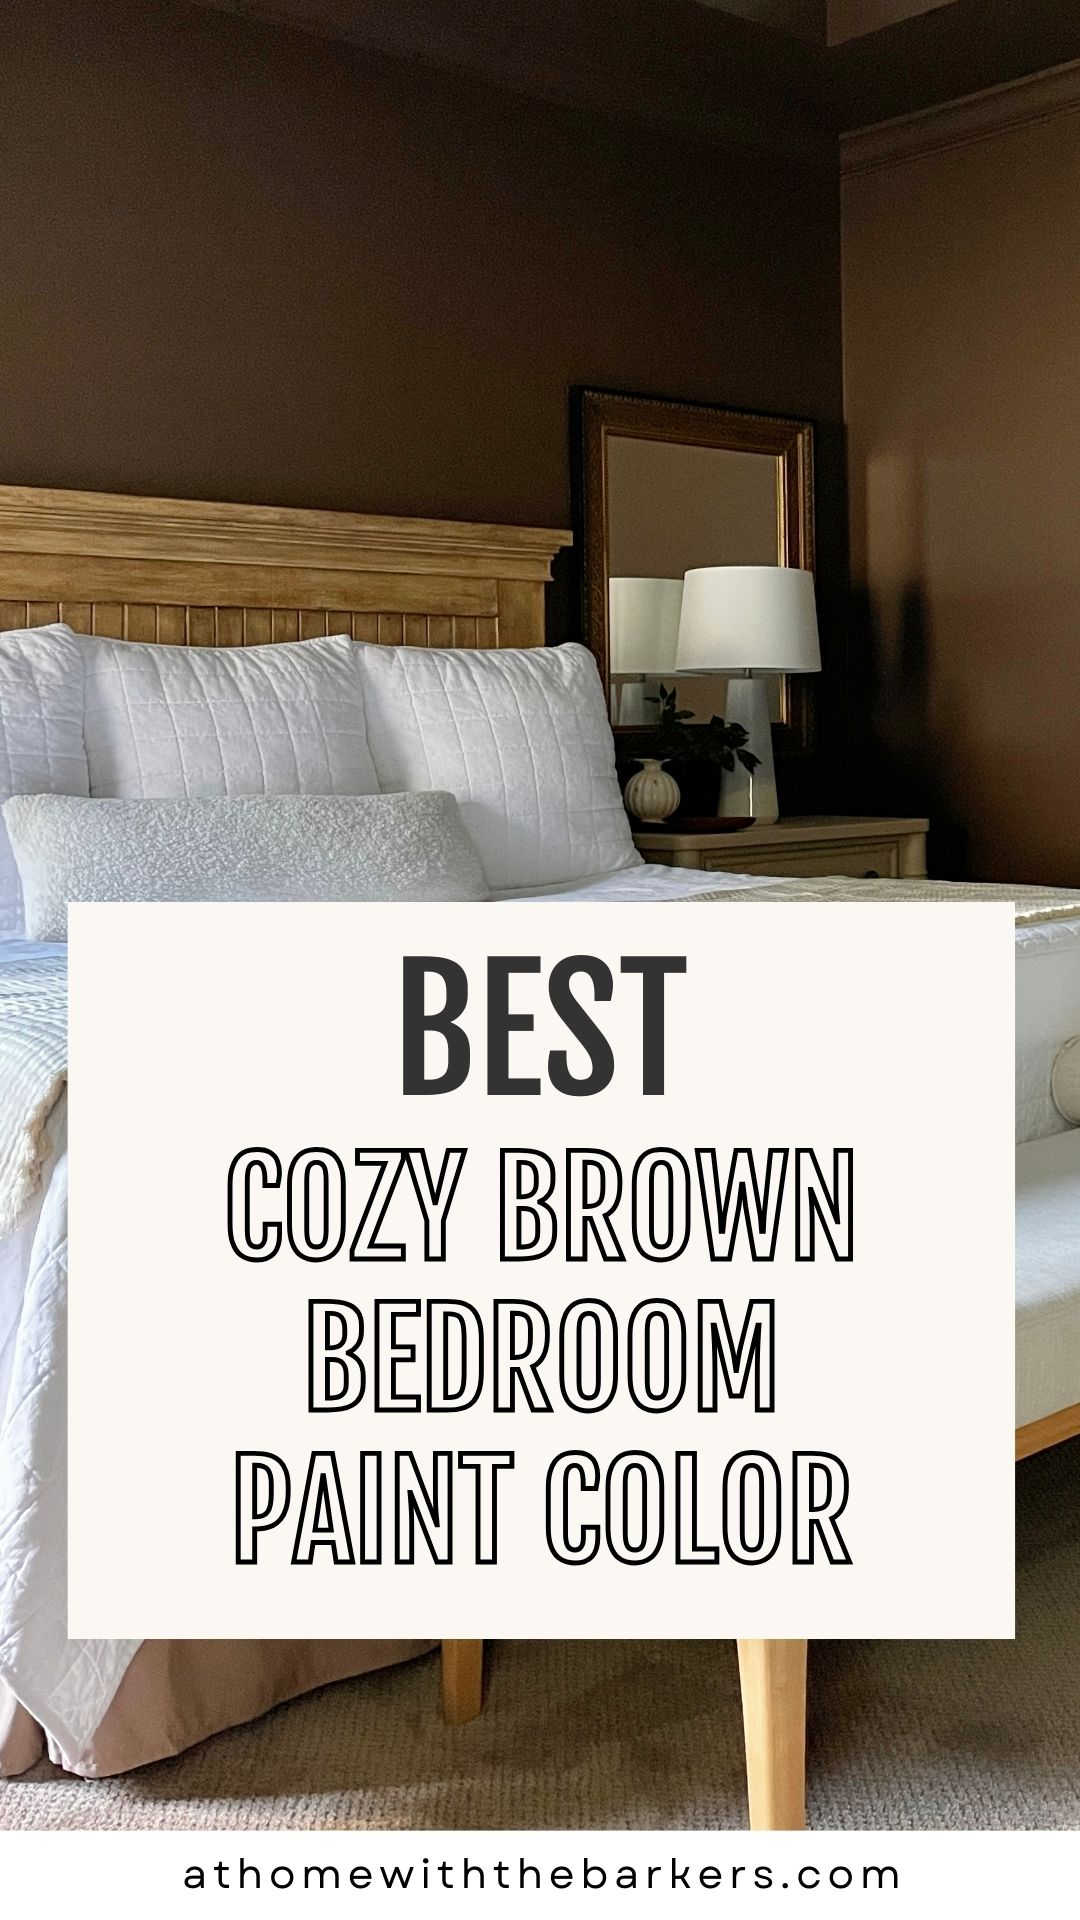 Dark brown paint color for cozy bedroom makeover